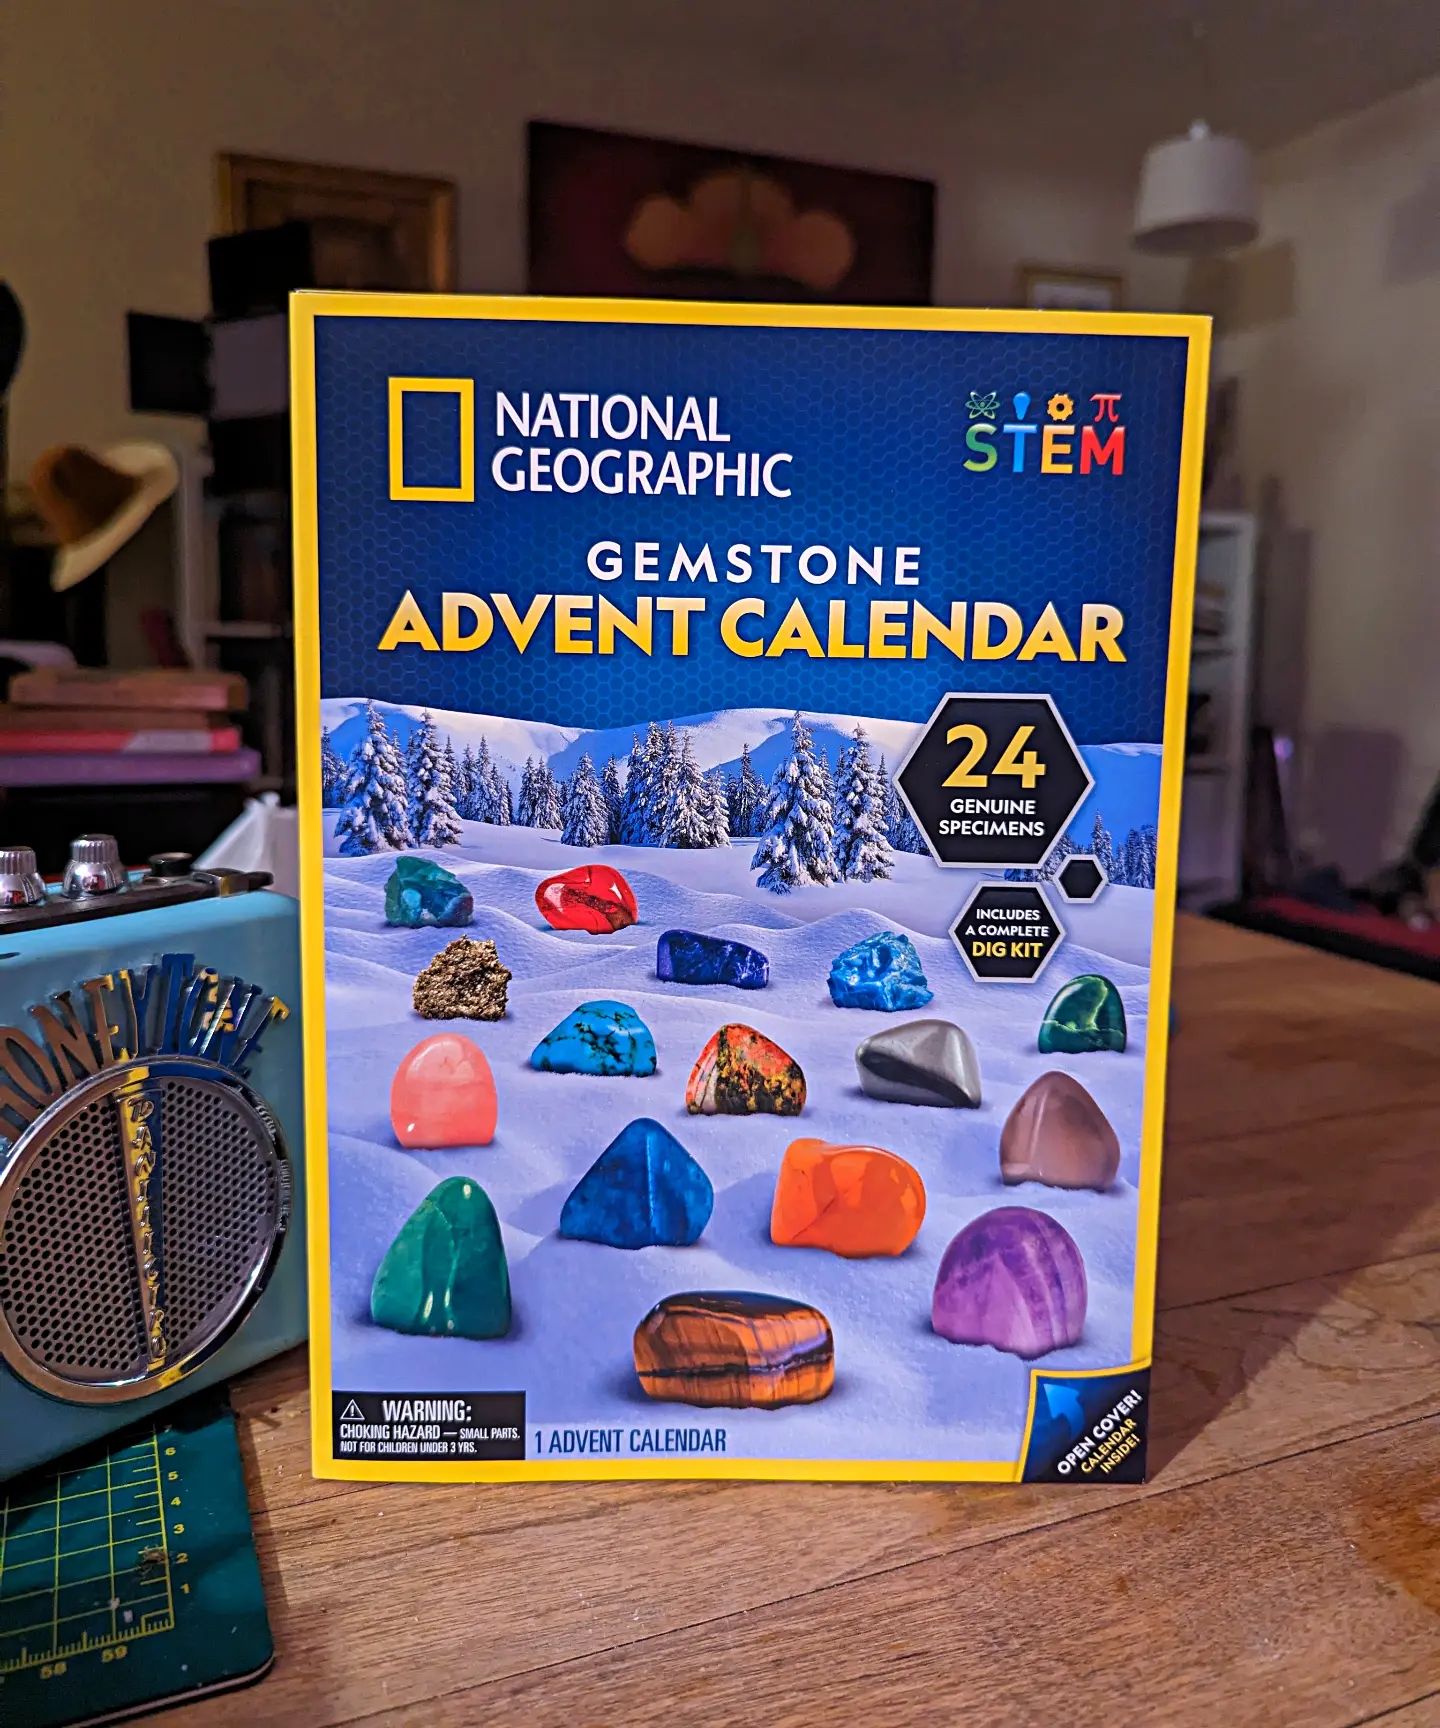 Super excited about my Advent Calendar...let the adventure begin.

#nationalgeographic #gems #minerals #gemsandminerals #yule #solstice